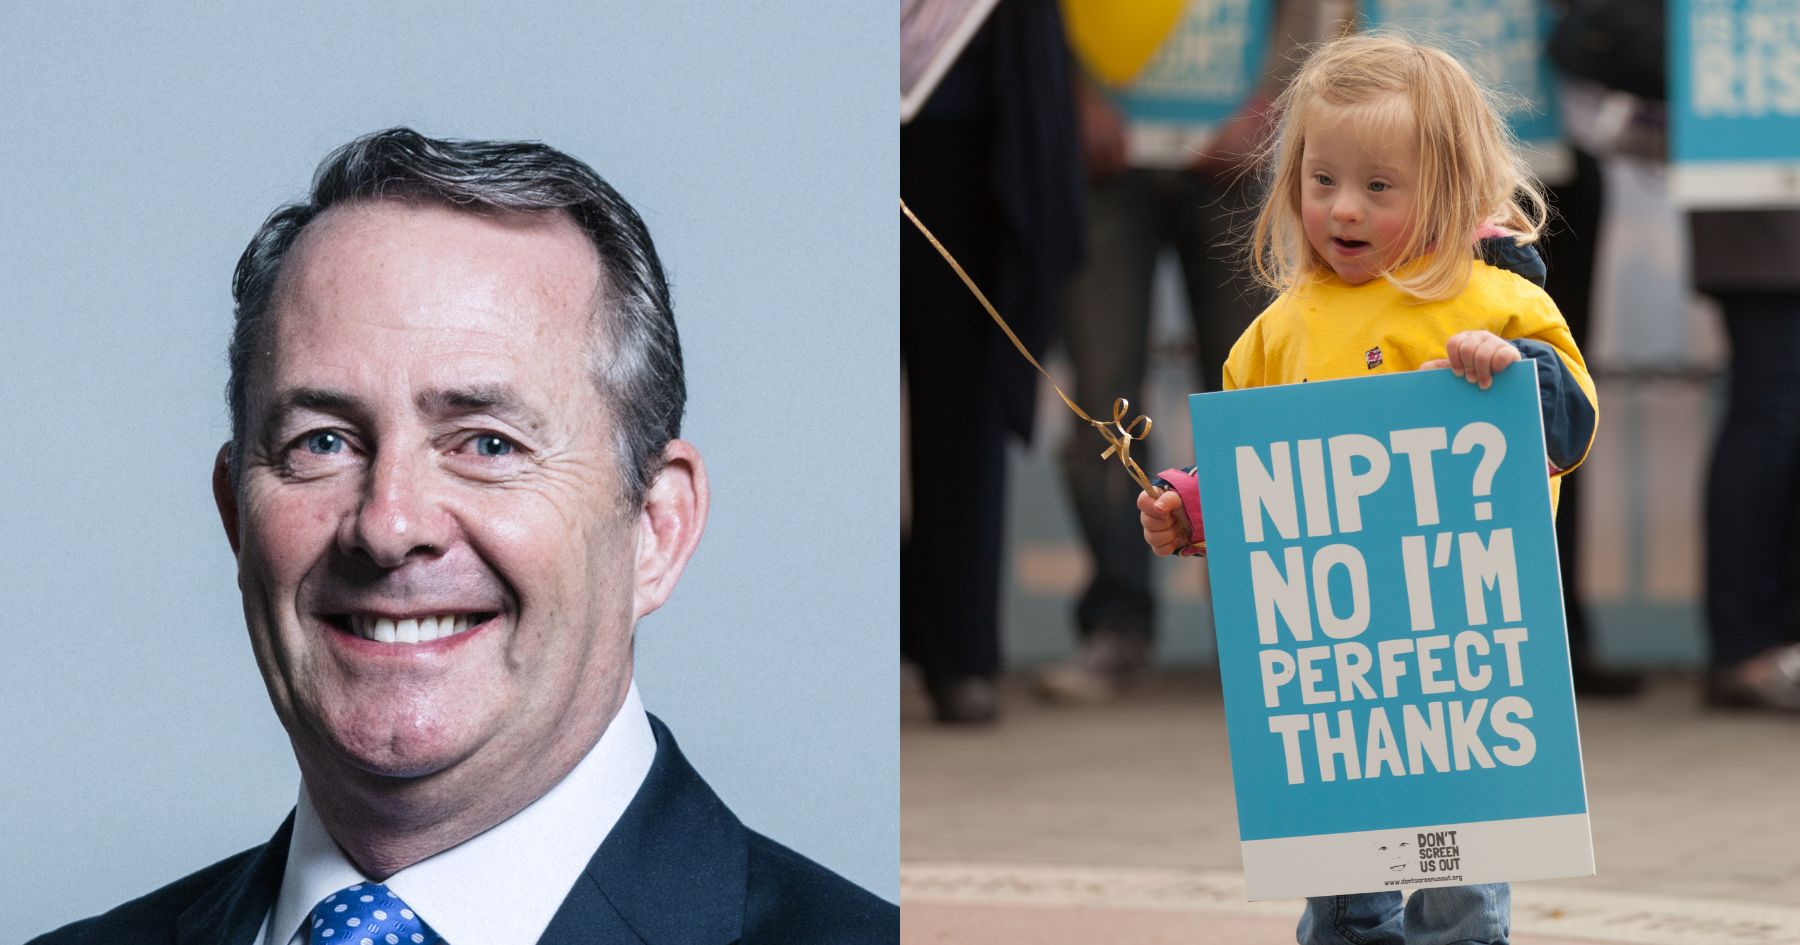 Press Release - Sir Liam Fox MP tables amendment to stop abortion up to birth for babies with Down's syndrome